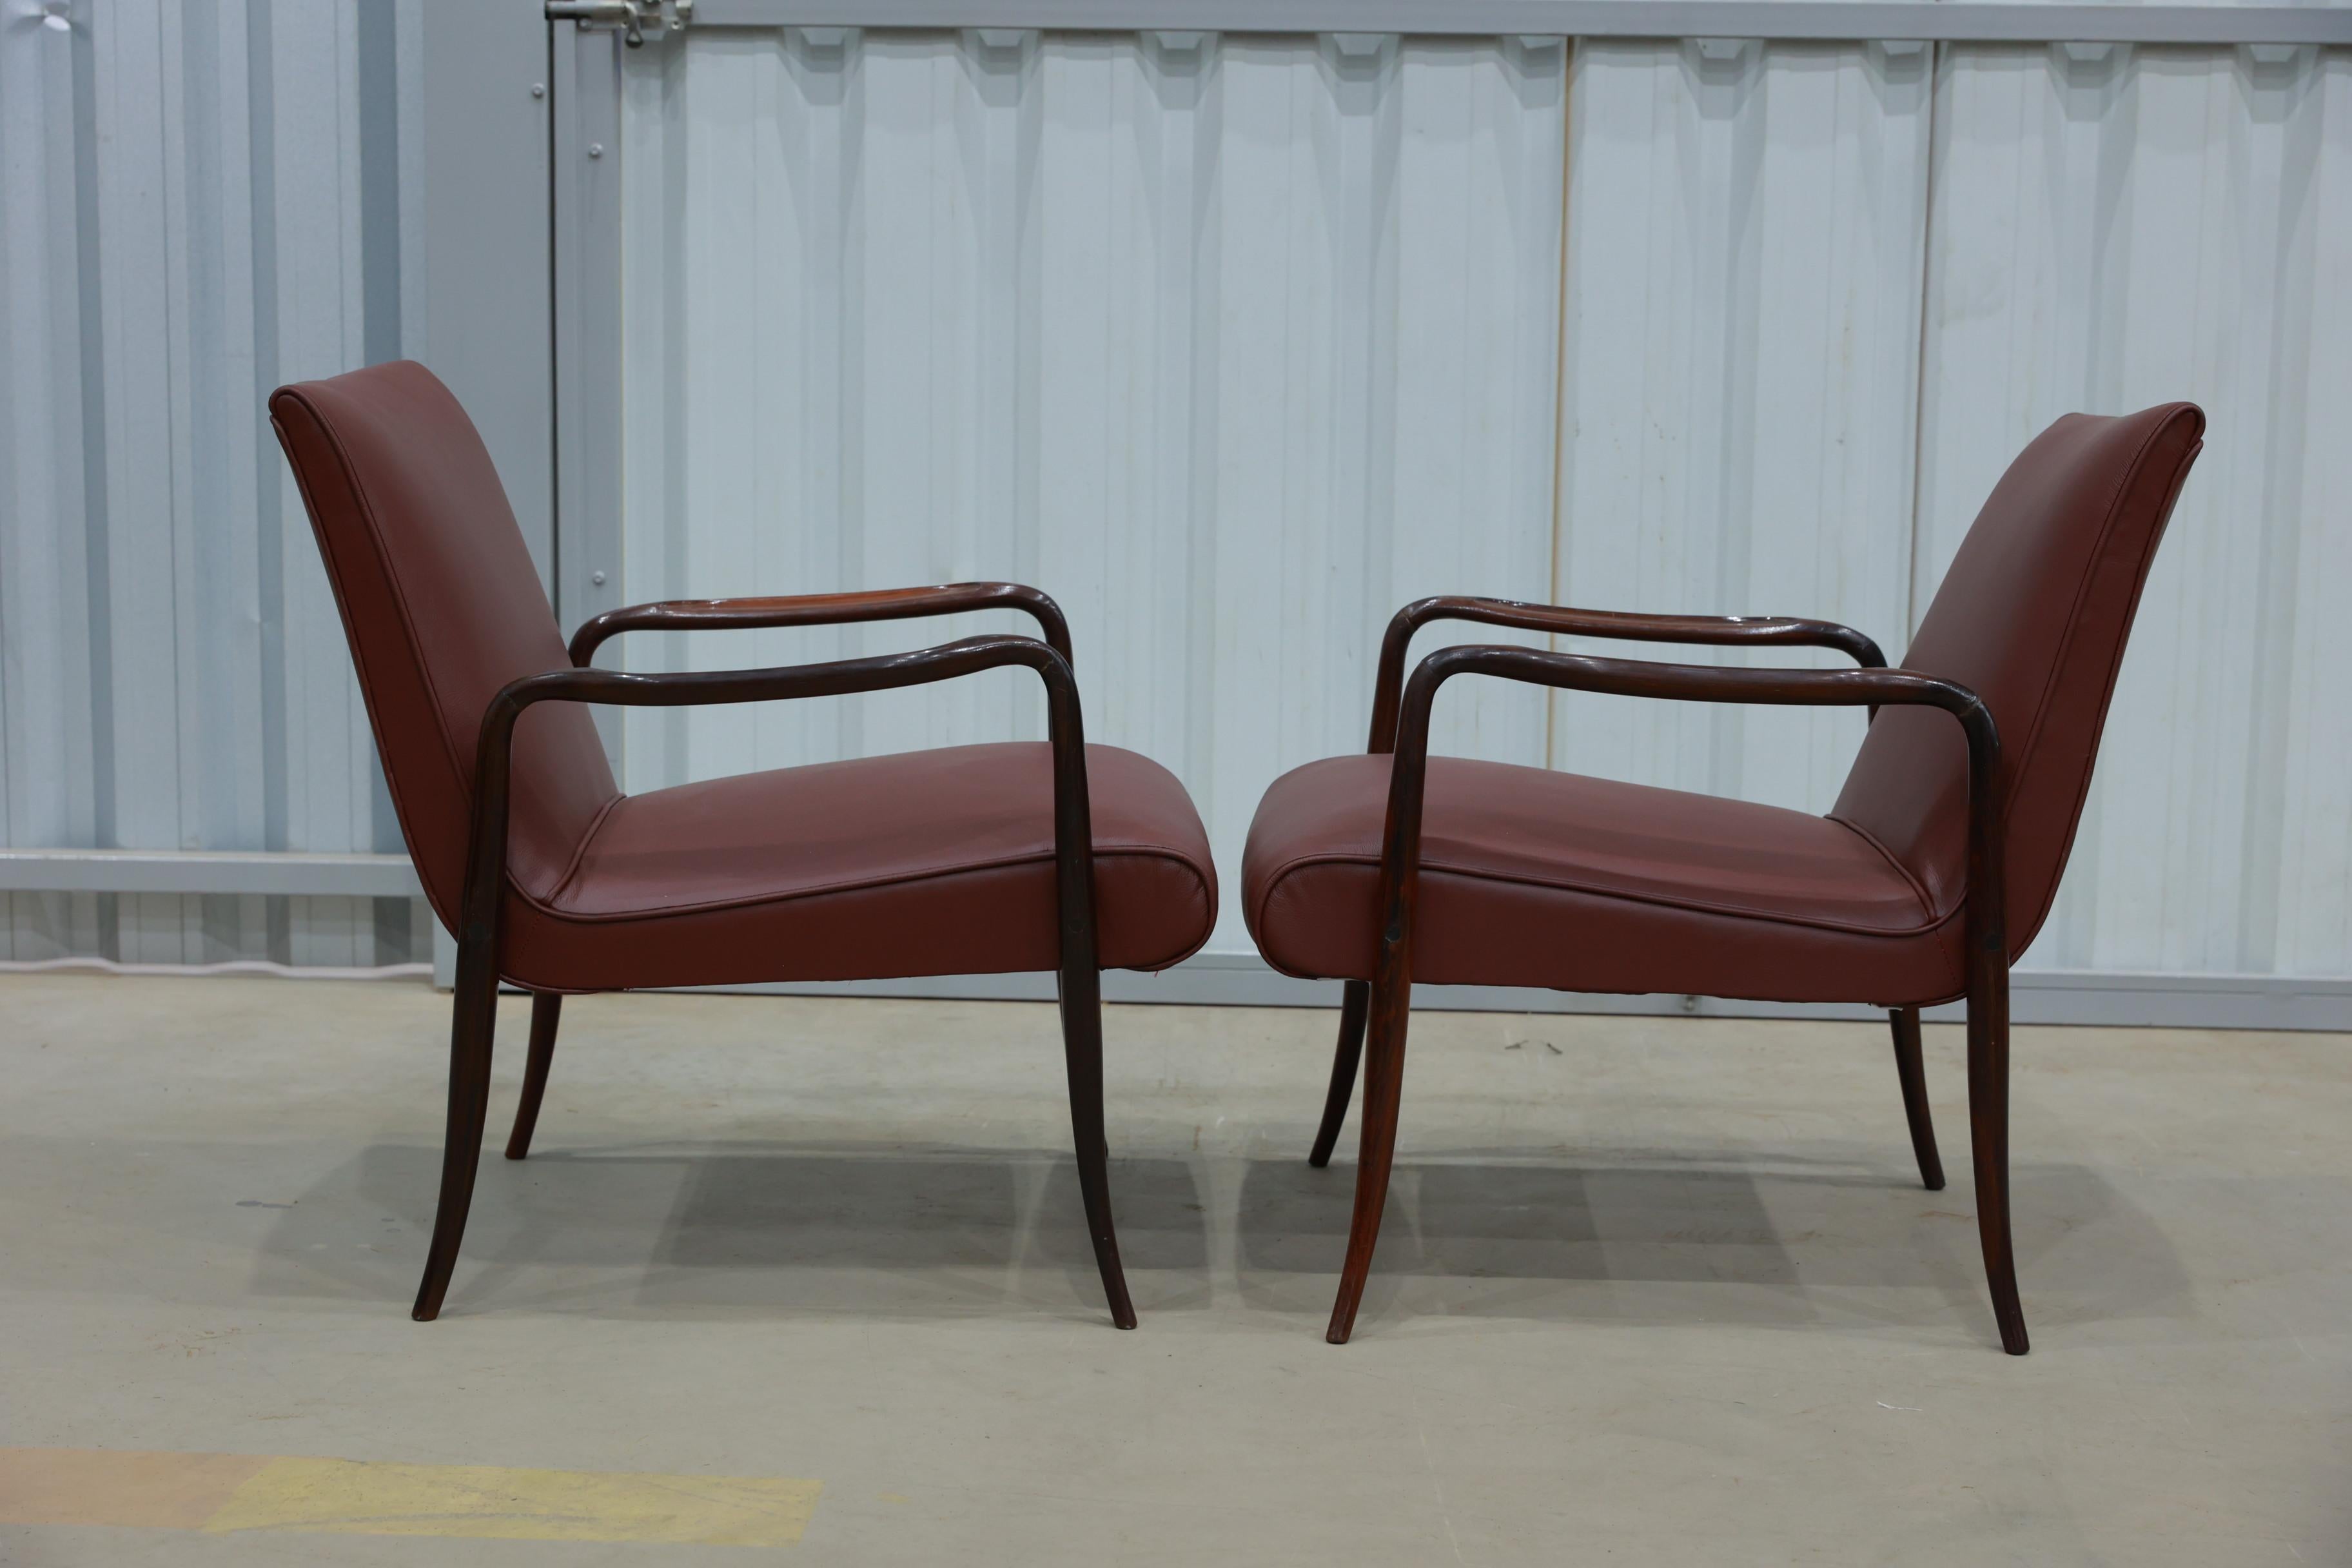 Mid-Century Modern Pair of “Leve” armchairs in hardwood & leather by Joaquim Tenreiro, 1942, Brazil For Sale